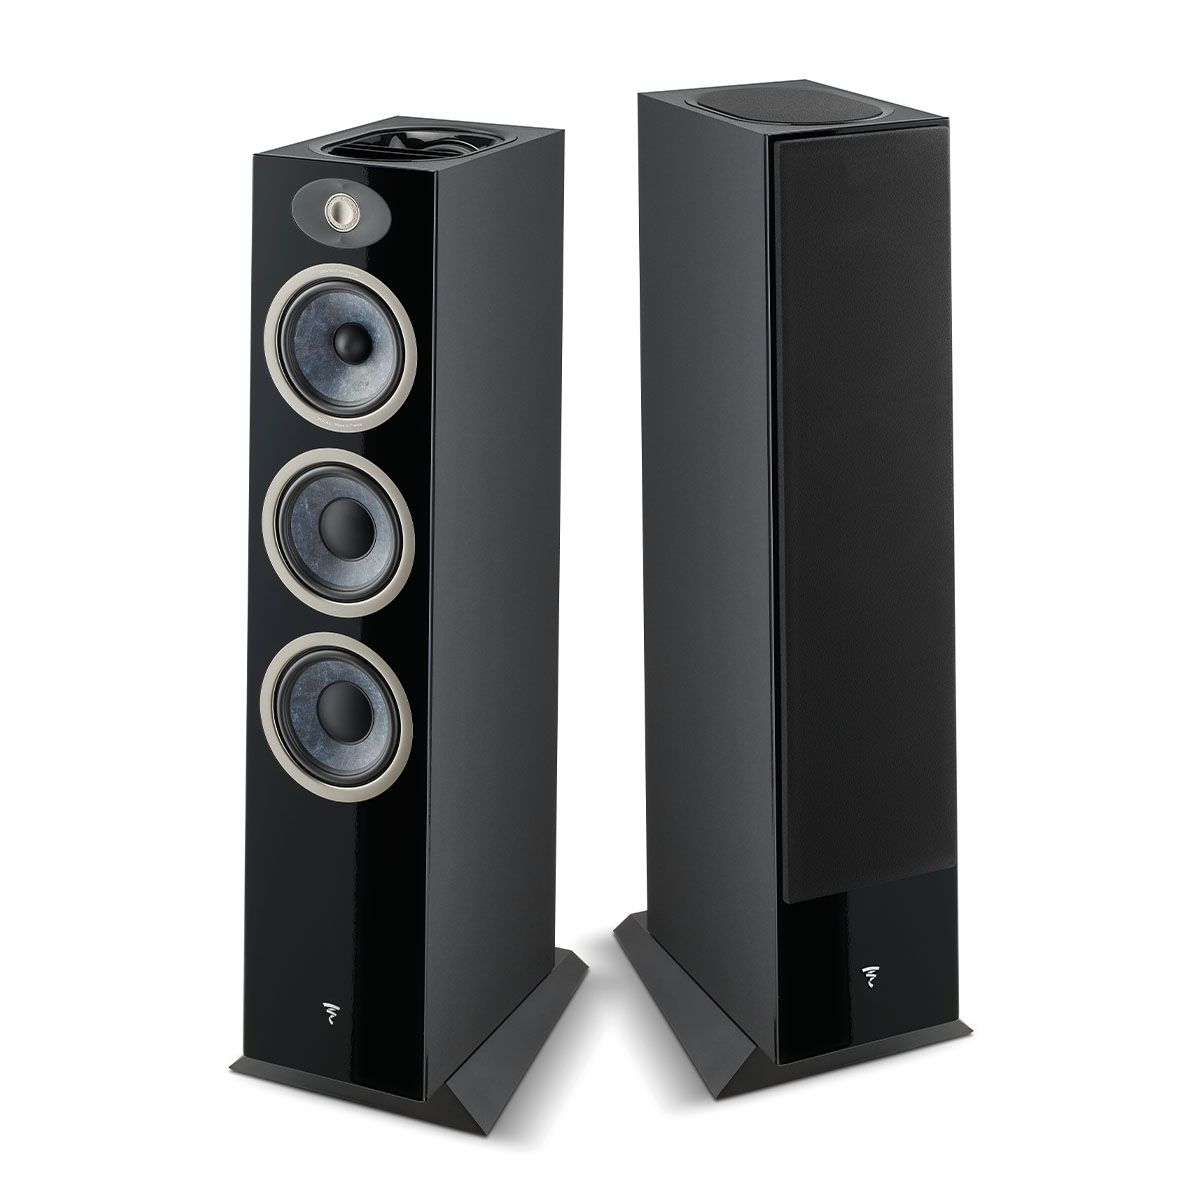 Focal Theva No3-D Floorstanding Speaker - Black - Each - view of pair, one with grilles, one without grilles